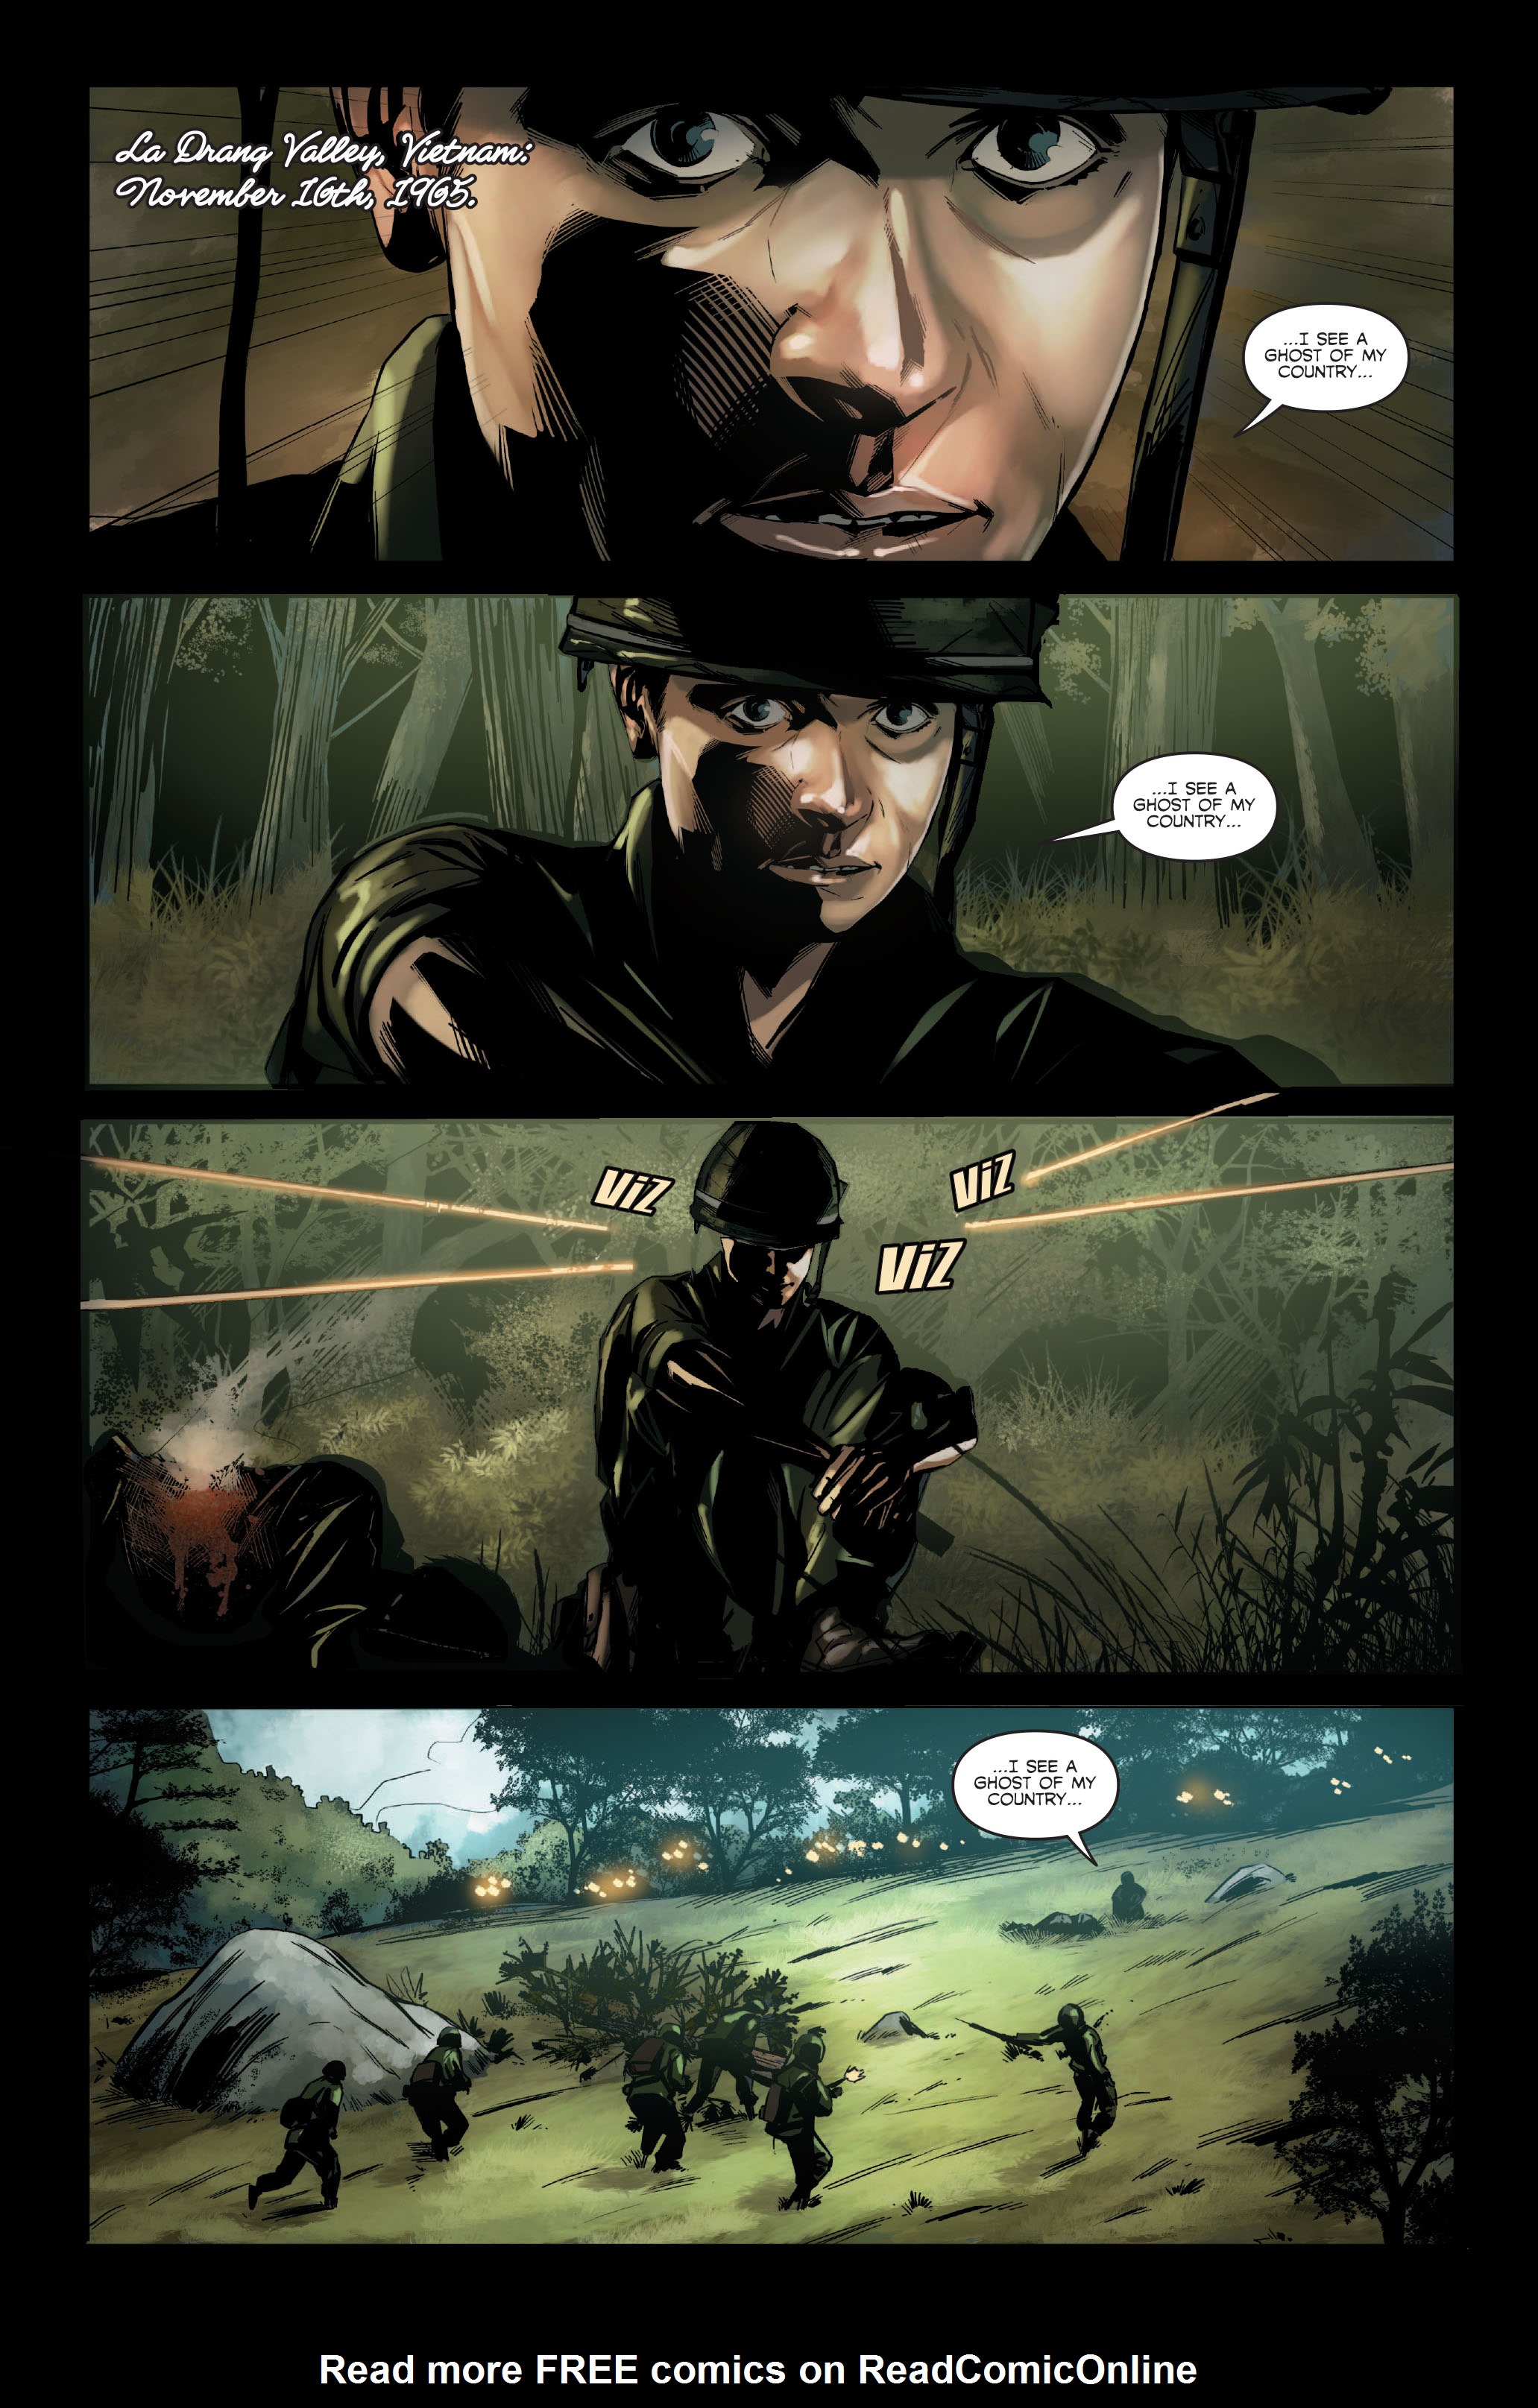 Captain America Theater of War: Ghosts of My Country Full Page 26